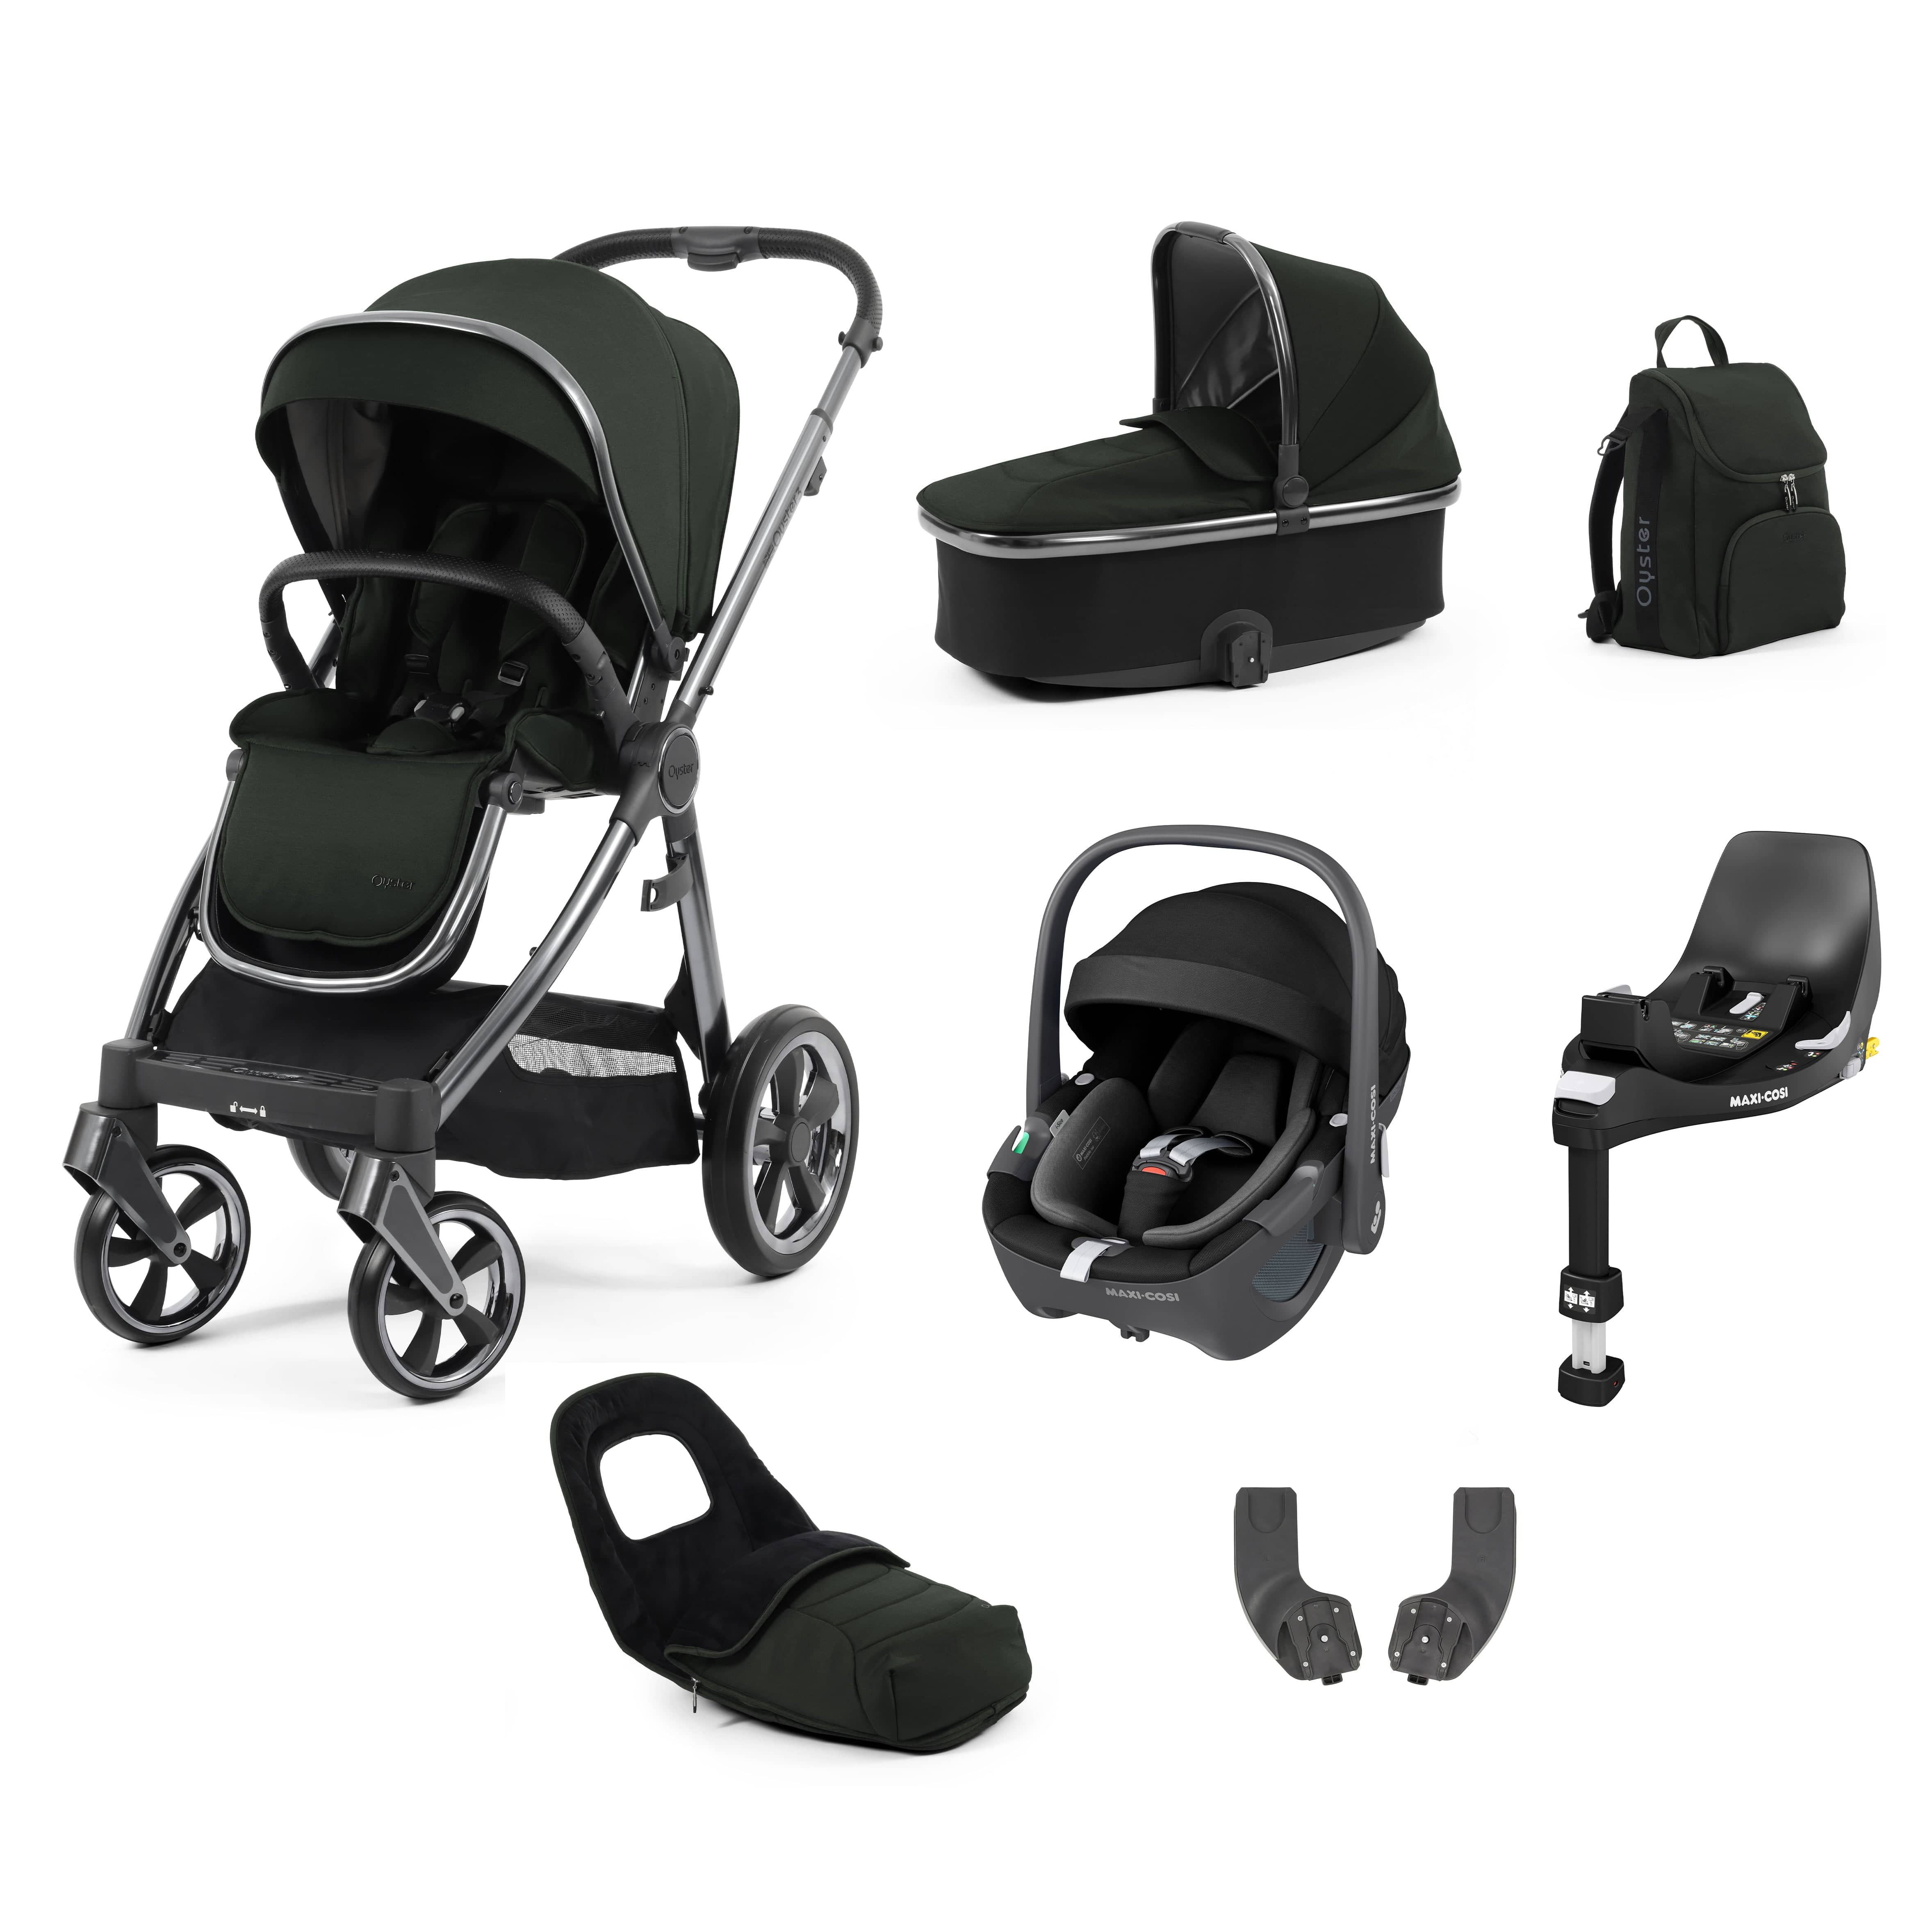 Babystyle Oyster 3 Luxury 7 Piece with Car Seat Bundle in Black Olive Travel Systems 14803-BLO 5060711567211